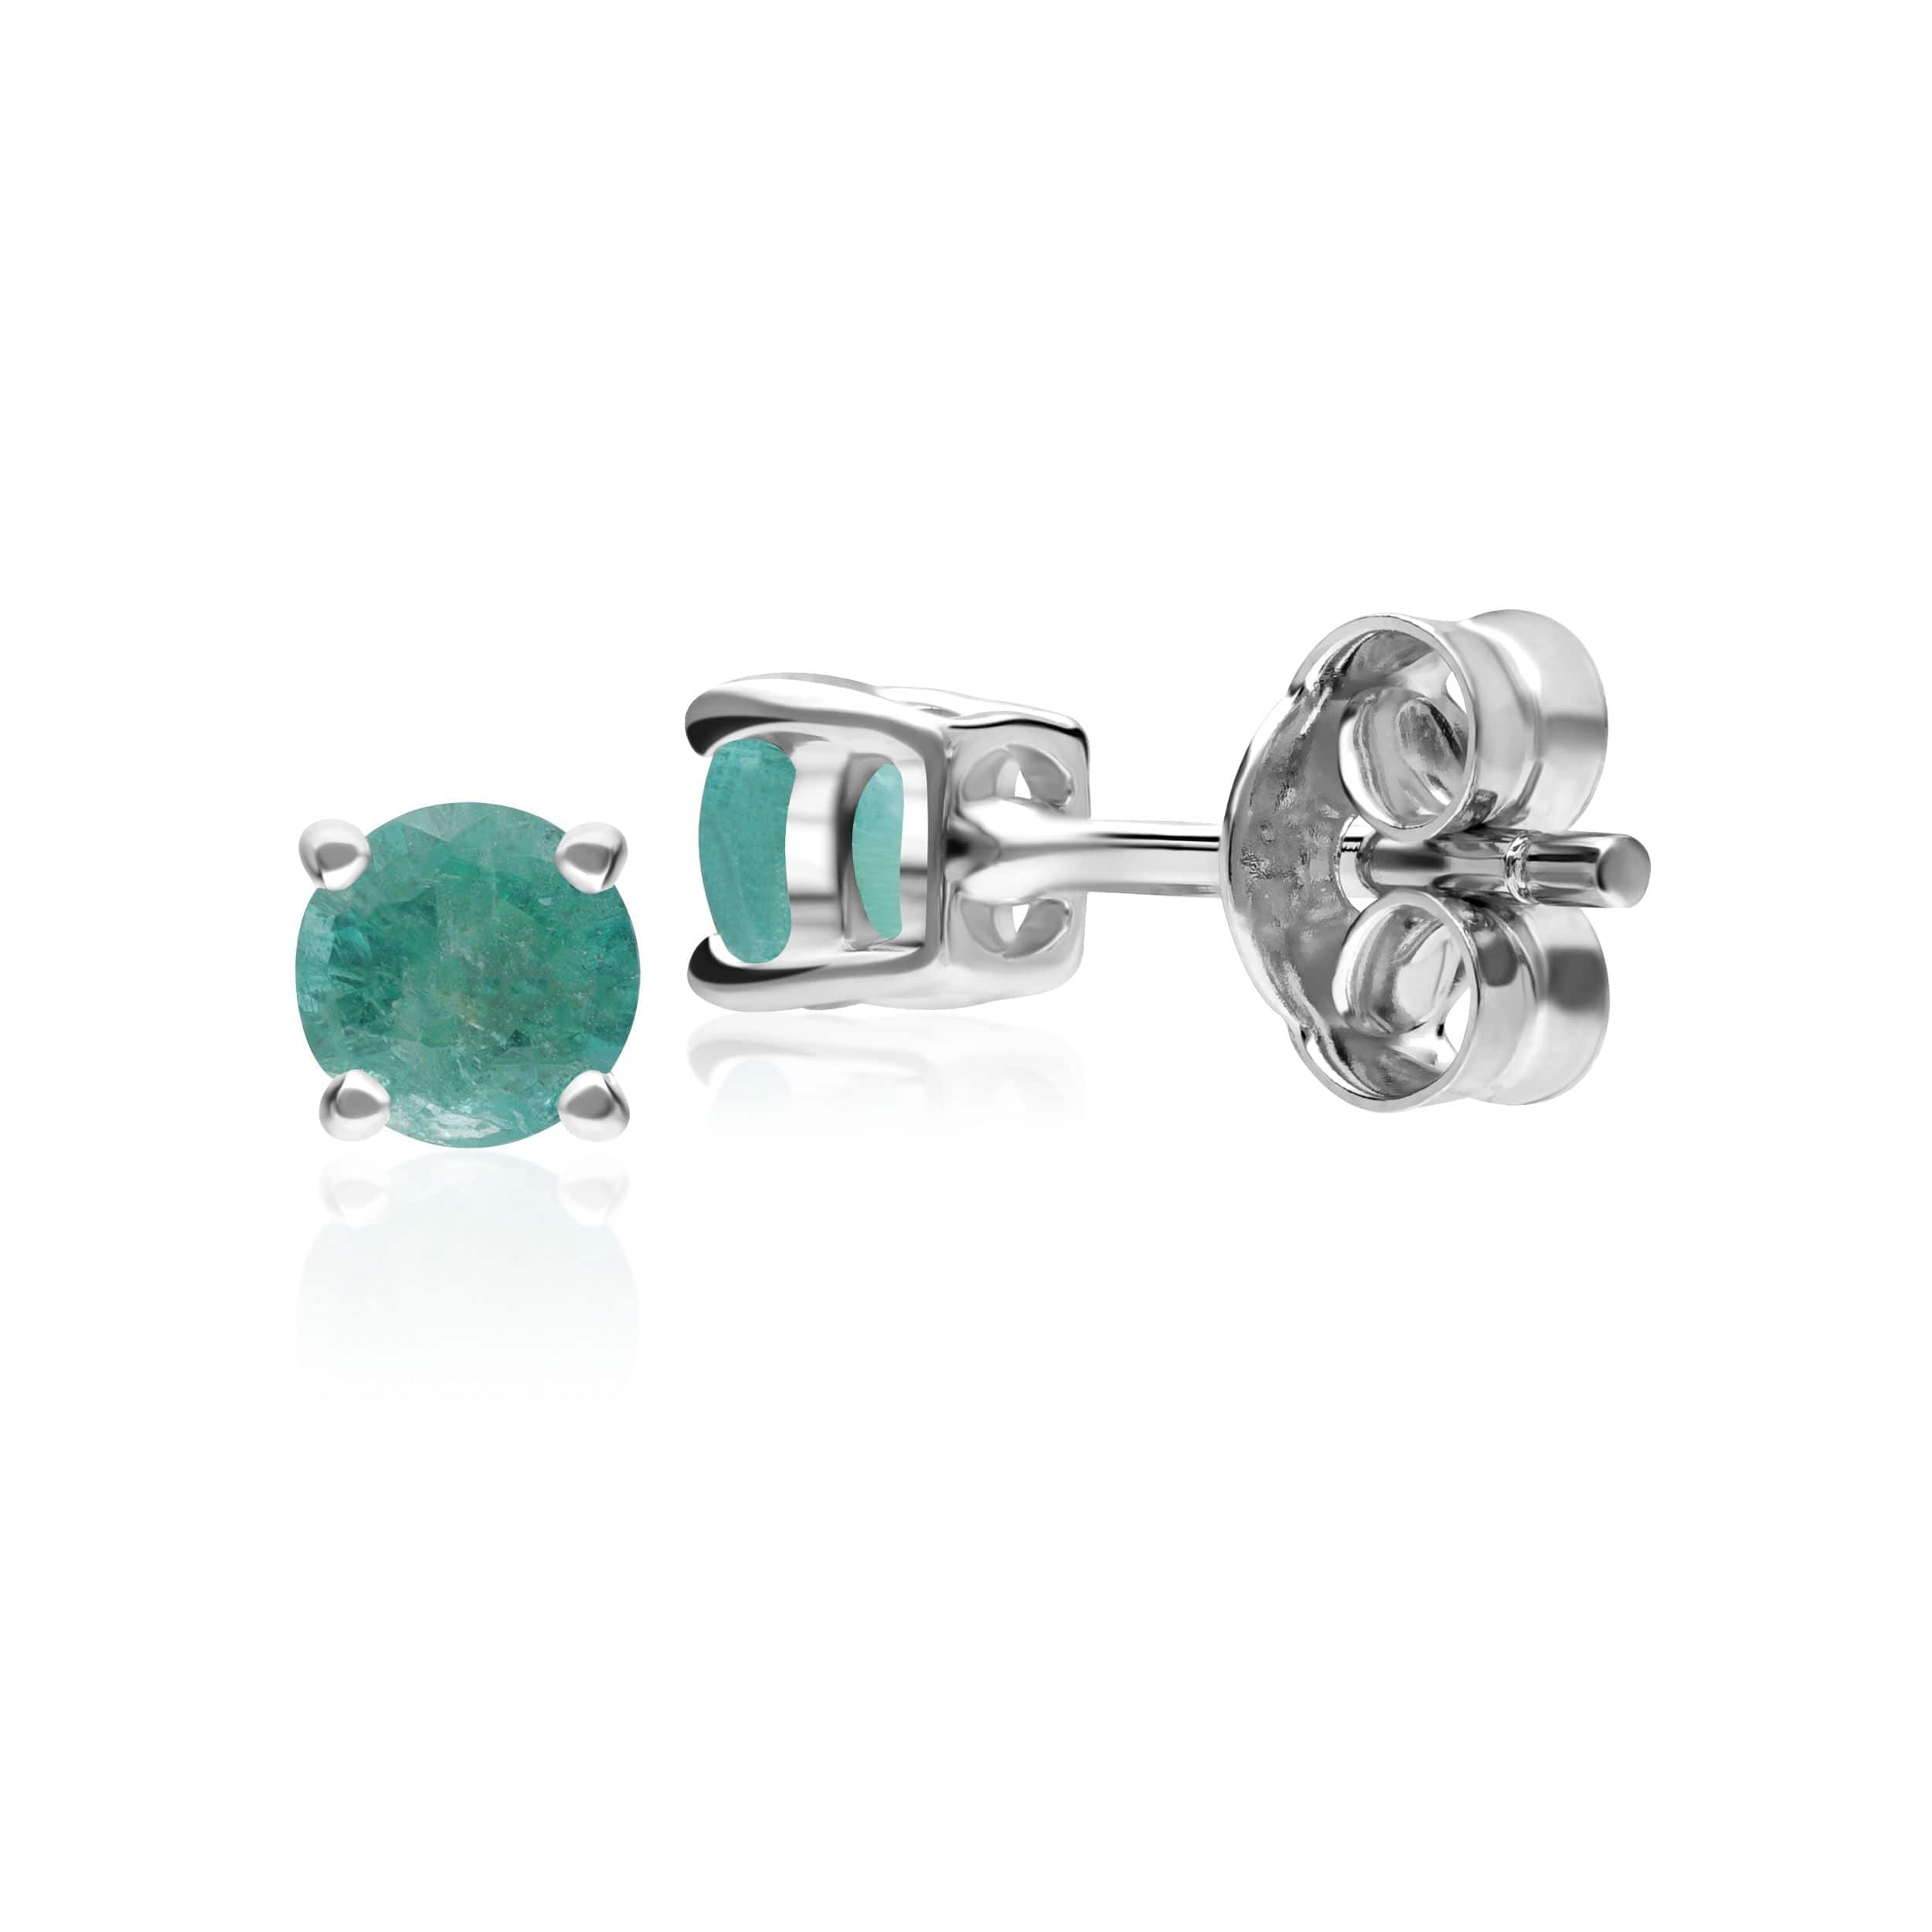 11621 Classic Round Emerald Stud Earrings in 9ct White Gold 2